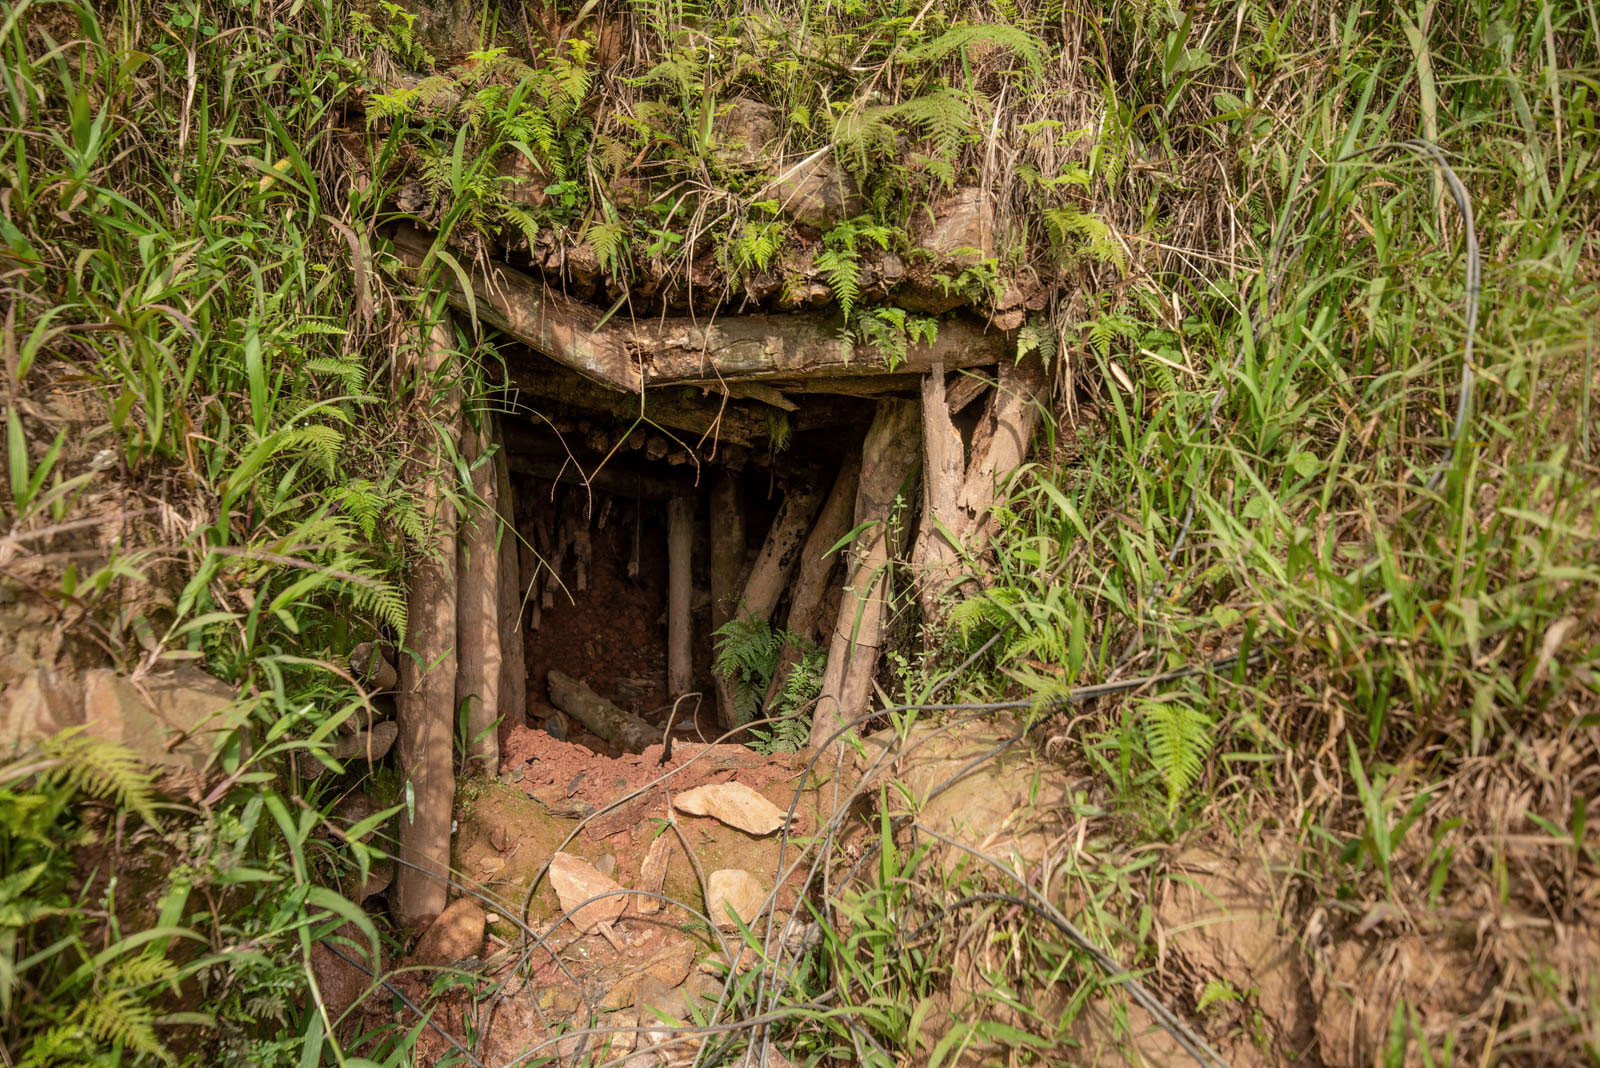 South Kivu Province, March 2021. The collapsing entry to one of the dangerous mine shafts at Kamituga. © Moses Sawasawa for Fondation Carmignac